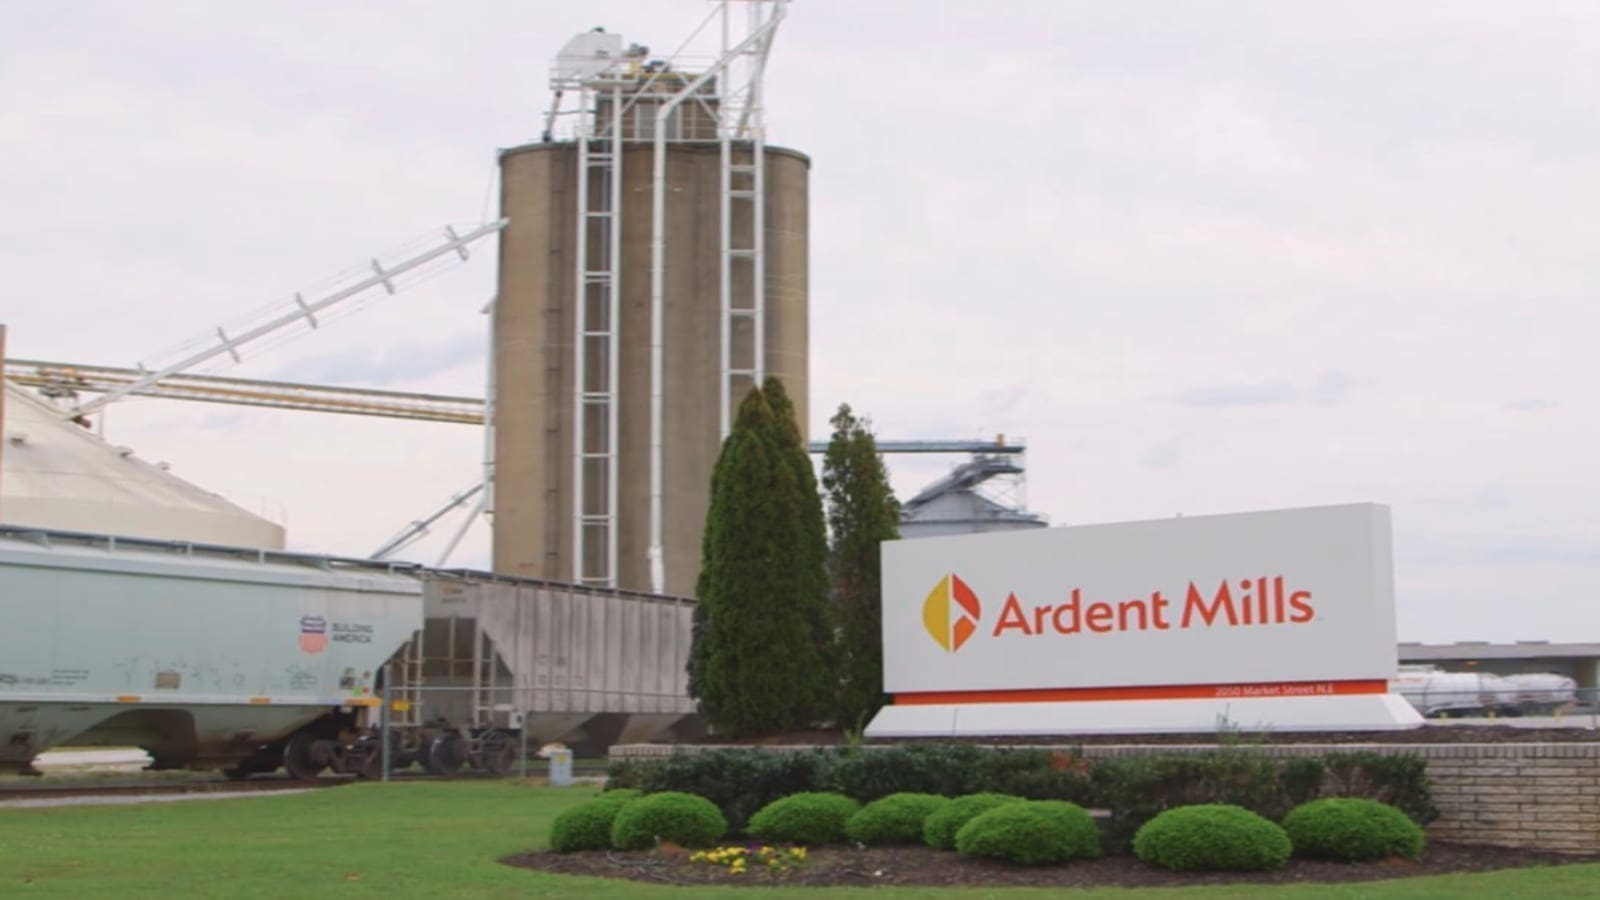 Ardent Mills acquires US chickpea supplier Hinrichs to meet growing demand for pulses